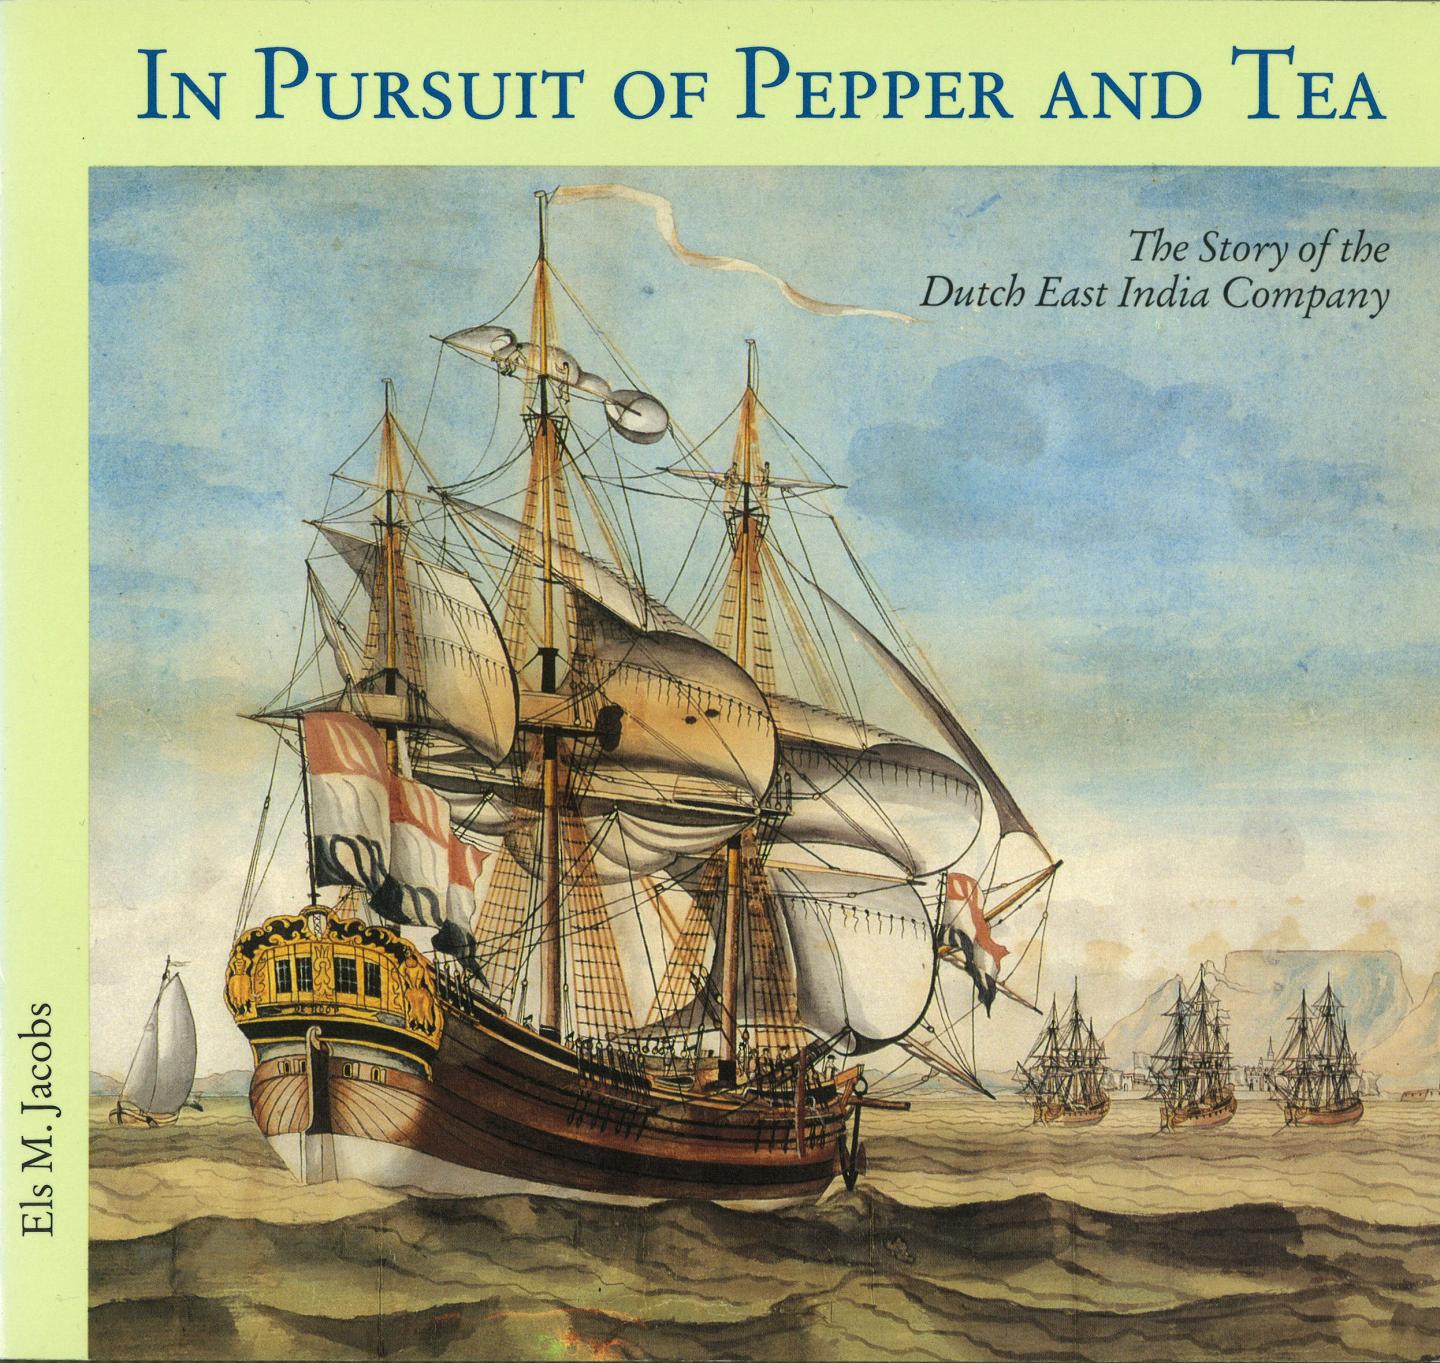 Jacobs, Els M. - In Pursuit of Pepper and Tea - The Story of the Dutch East India Company